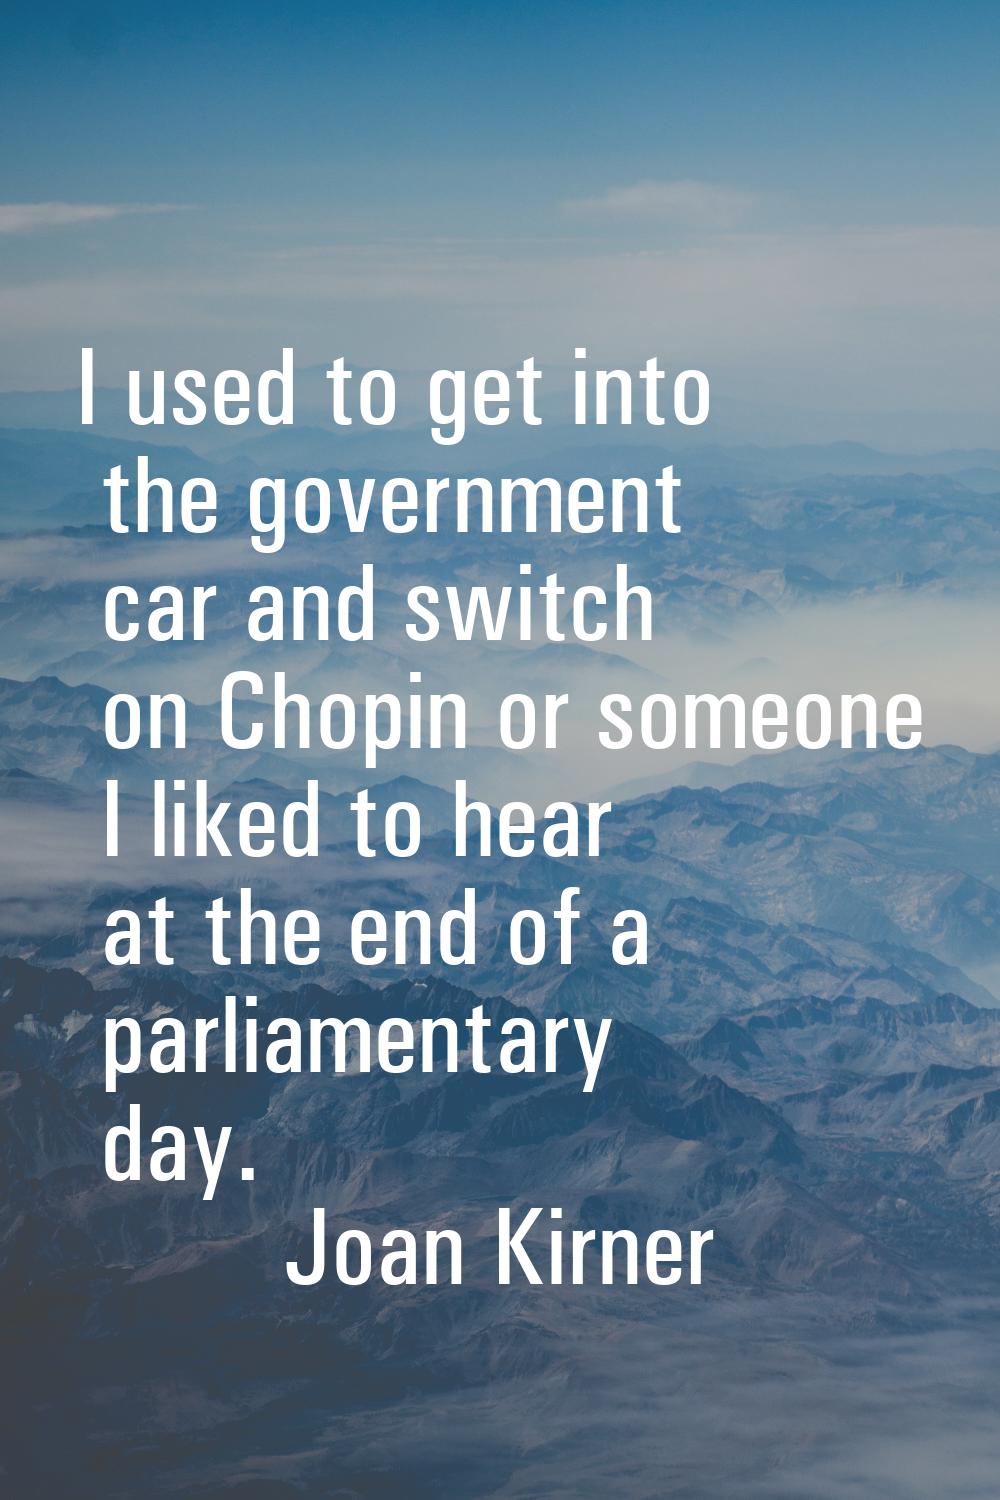 I used to get into the government car and switch on Chopin or someone I liked to hear at the end of